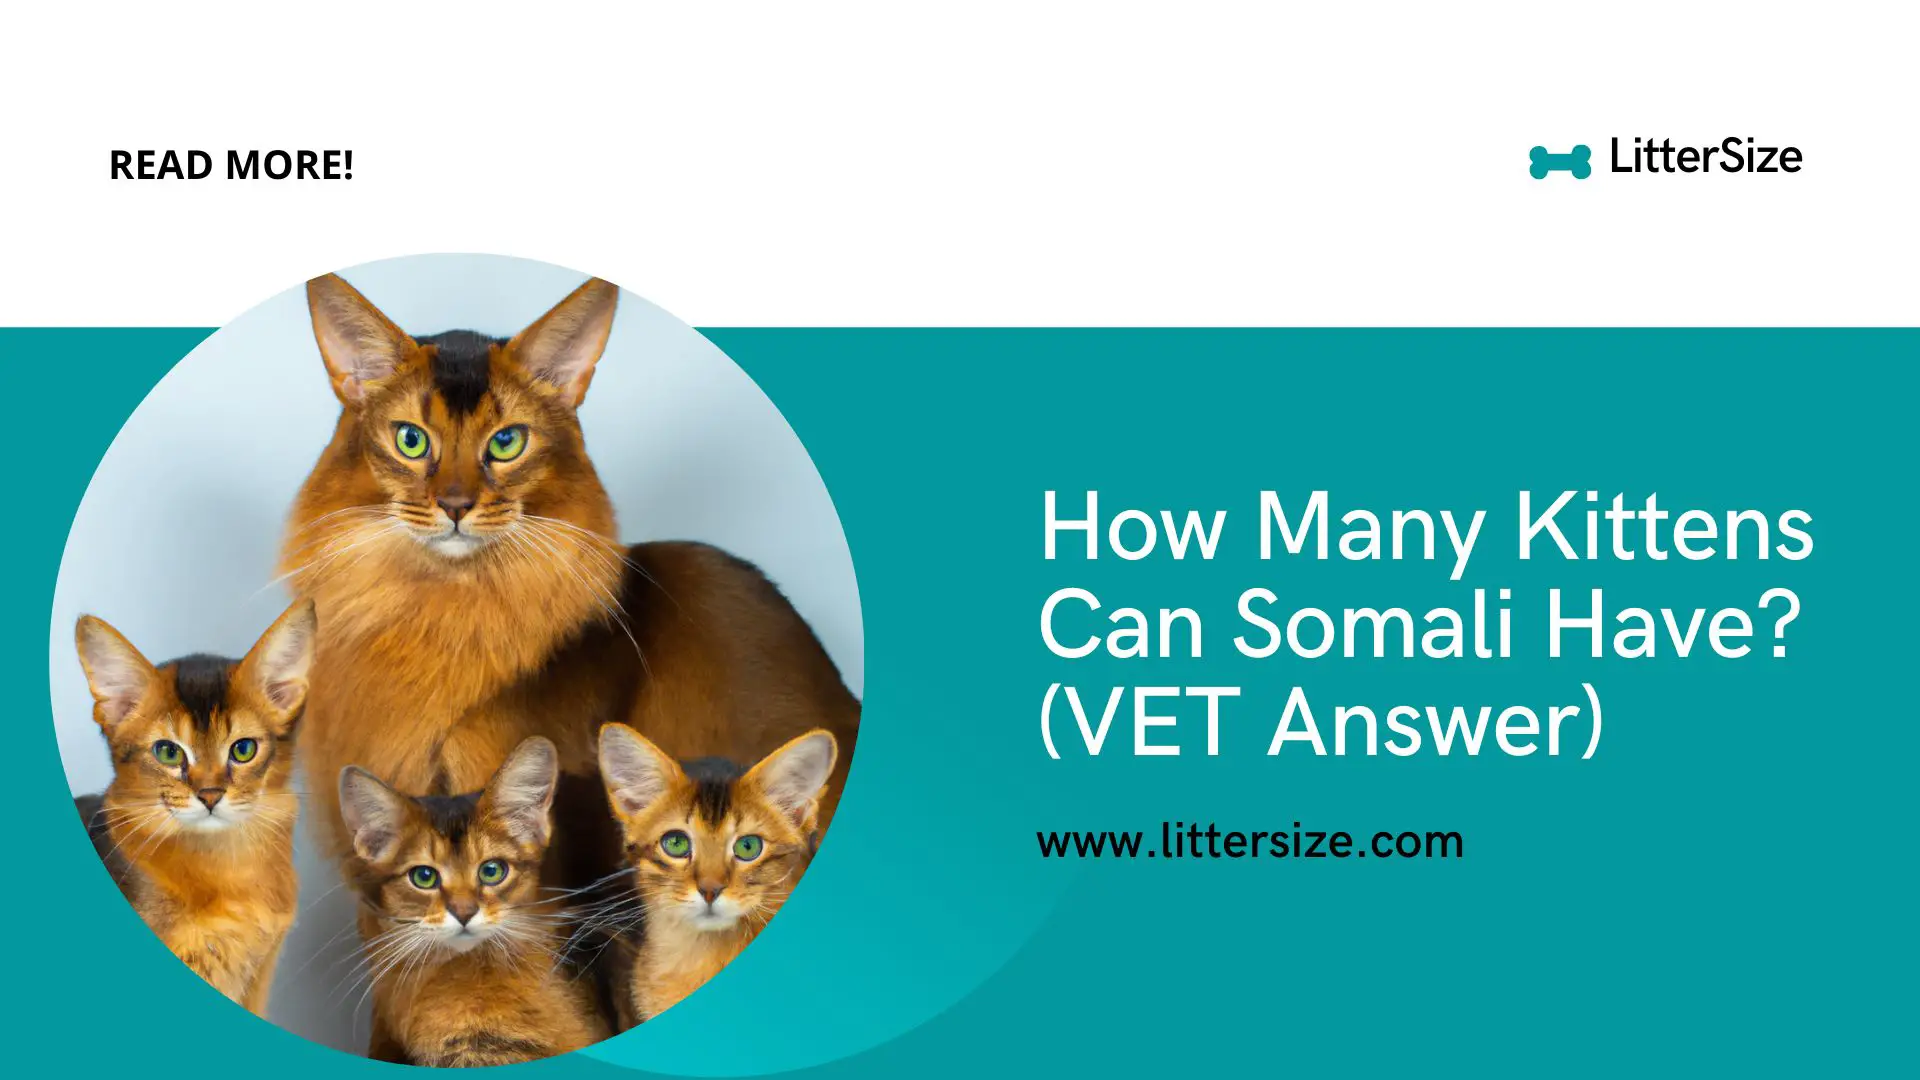 How Many Kittens Can Somali Have? (VET Answer)